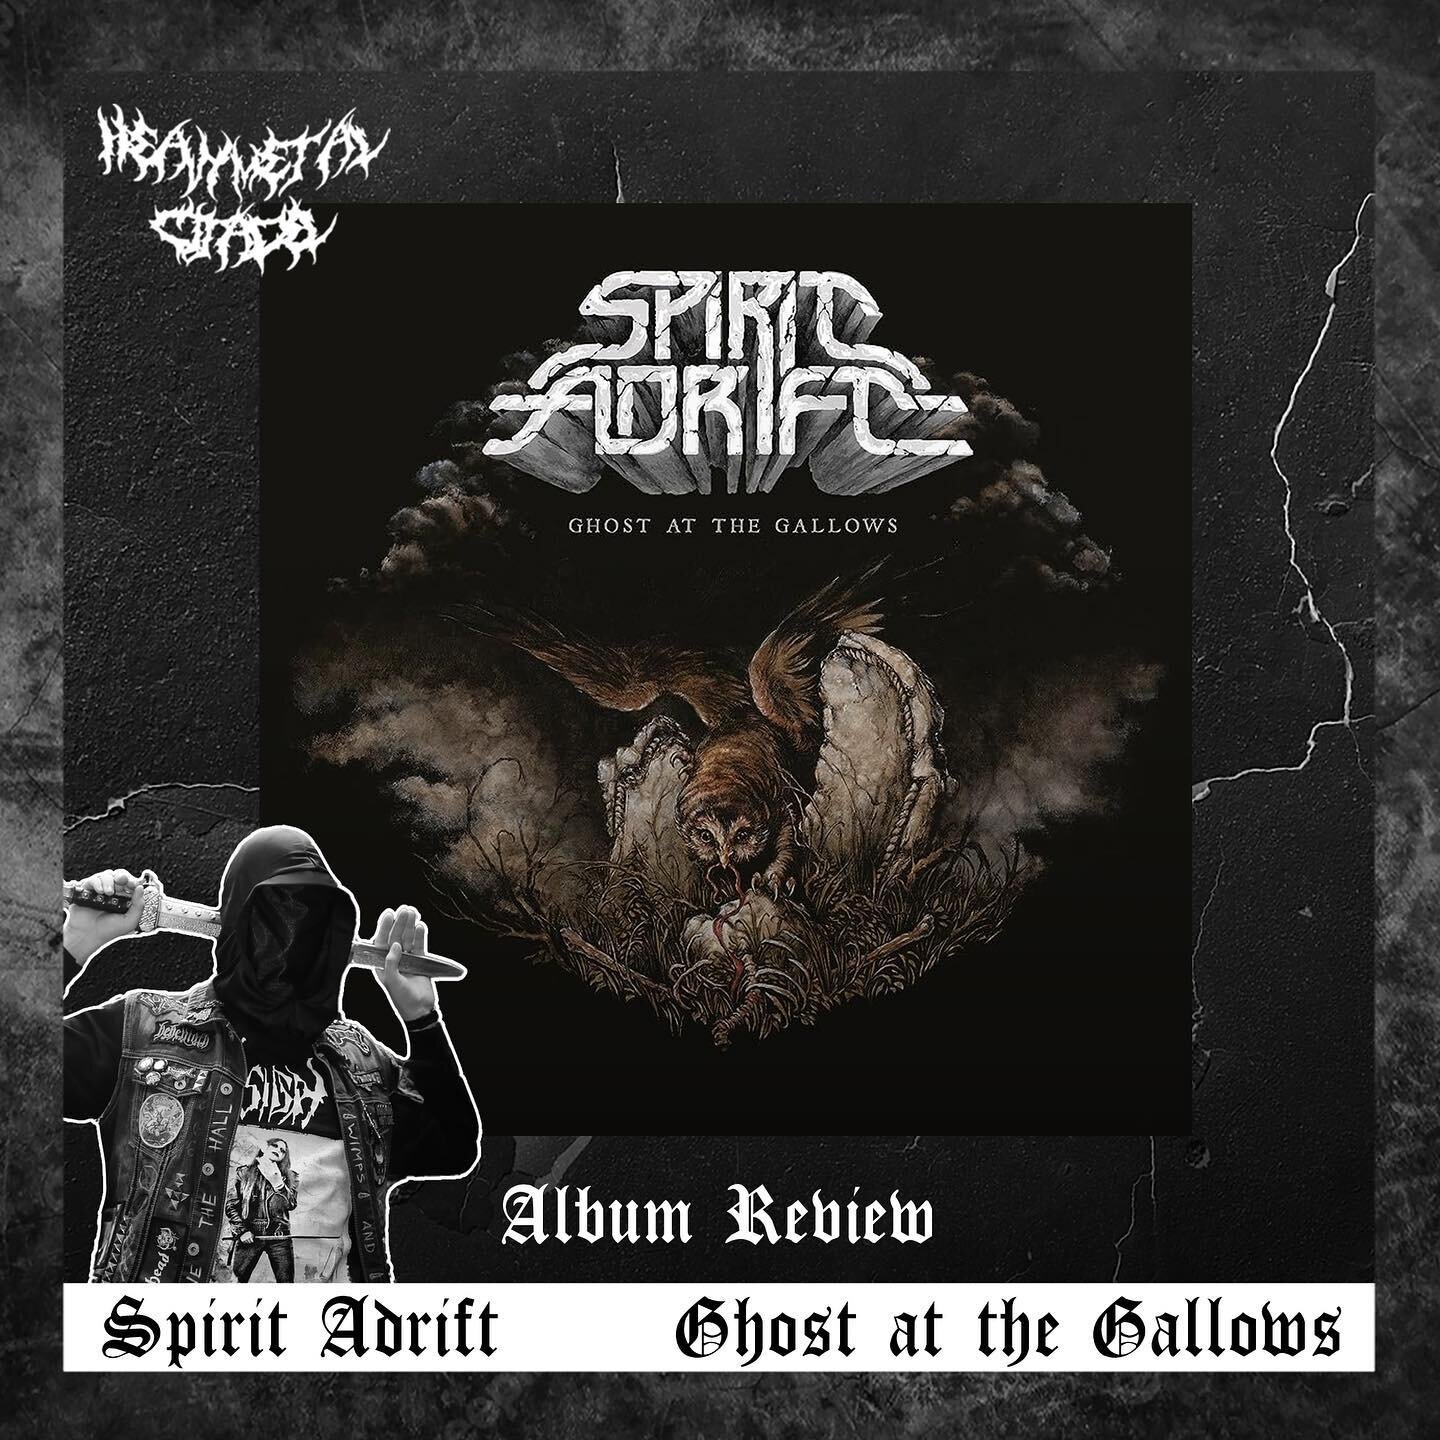 🔥NEW ALBUM REVIEW featuring @spiritadrift!🔥
The new album from Spirit Adrift goes live this Friday, ya'll. Check out What your favourite hero with the silver moustache, Chernoglav, had to say about it. 

#heavymetal #metalbands #heavymetalmusic #me